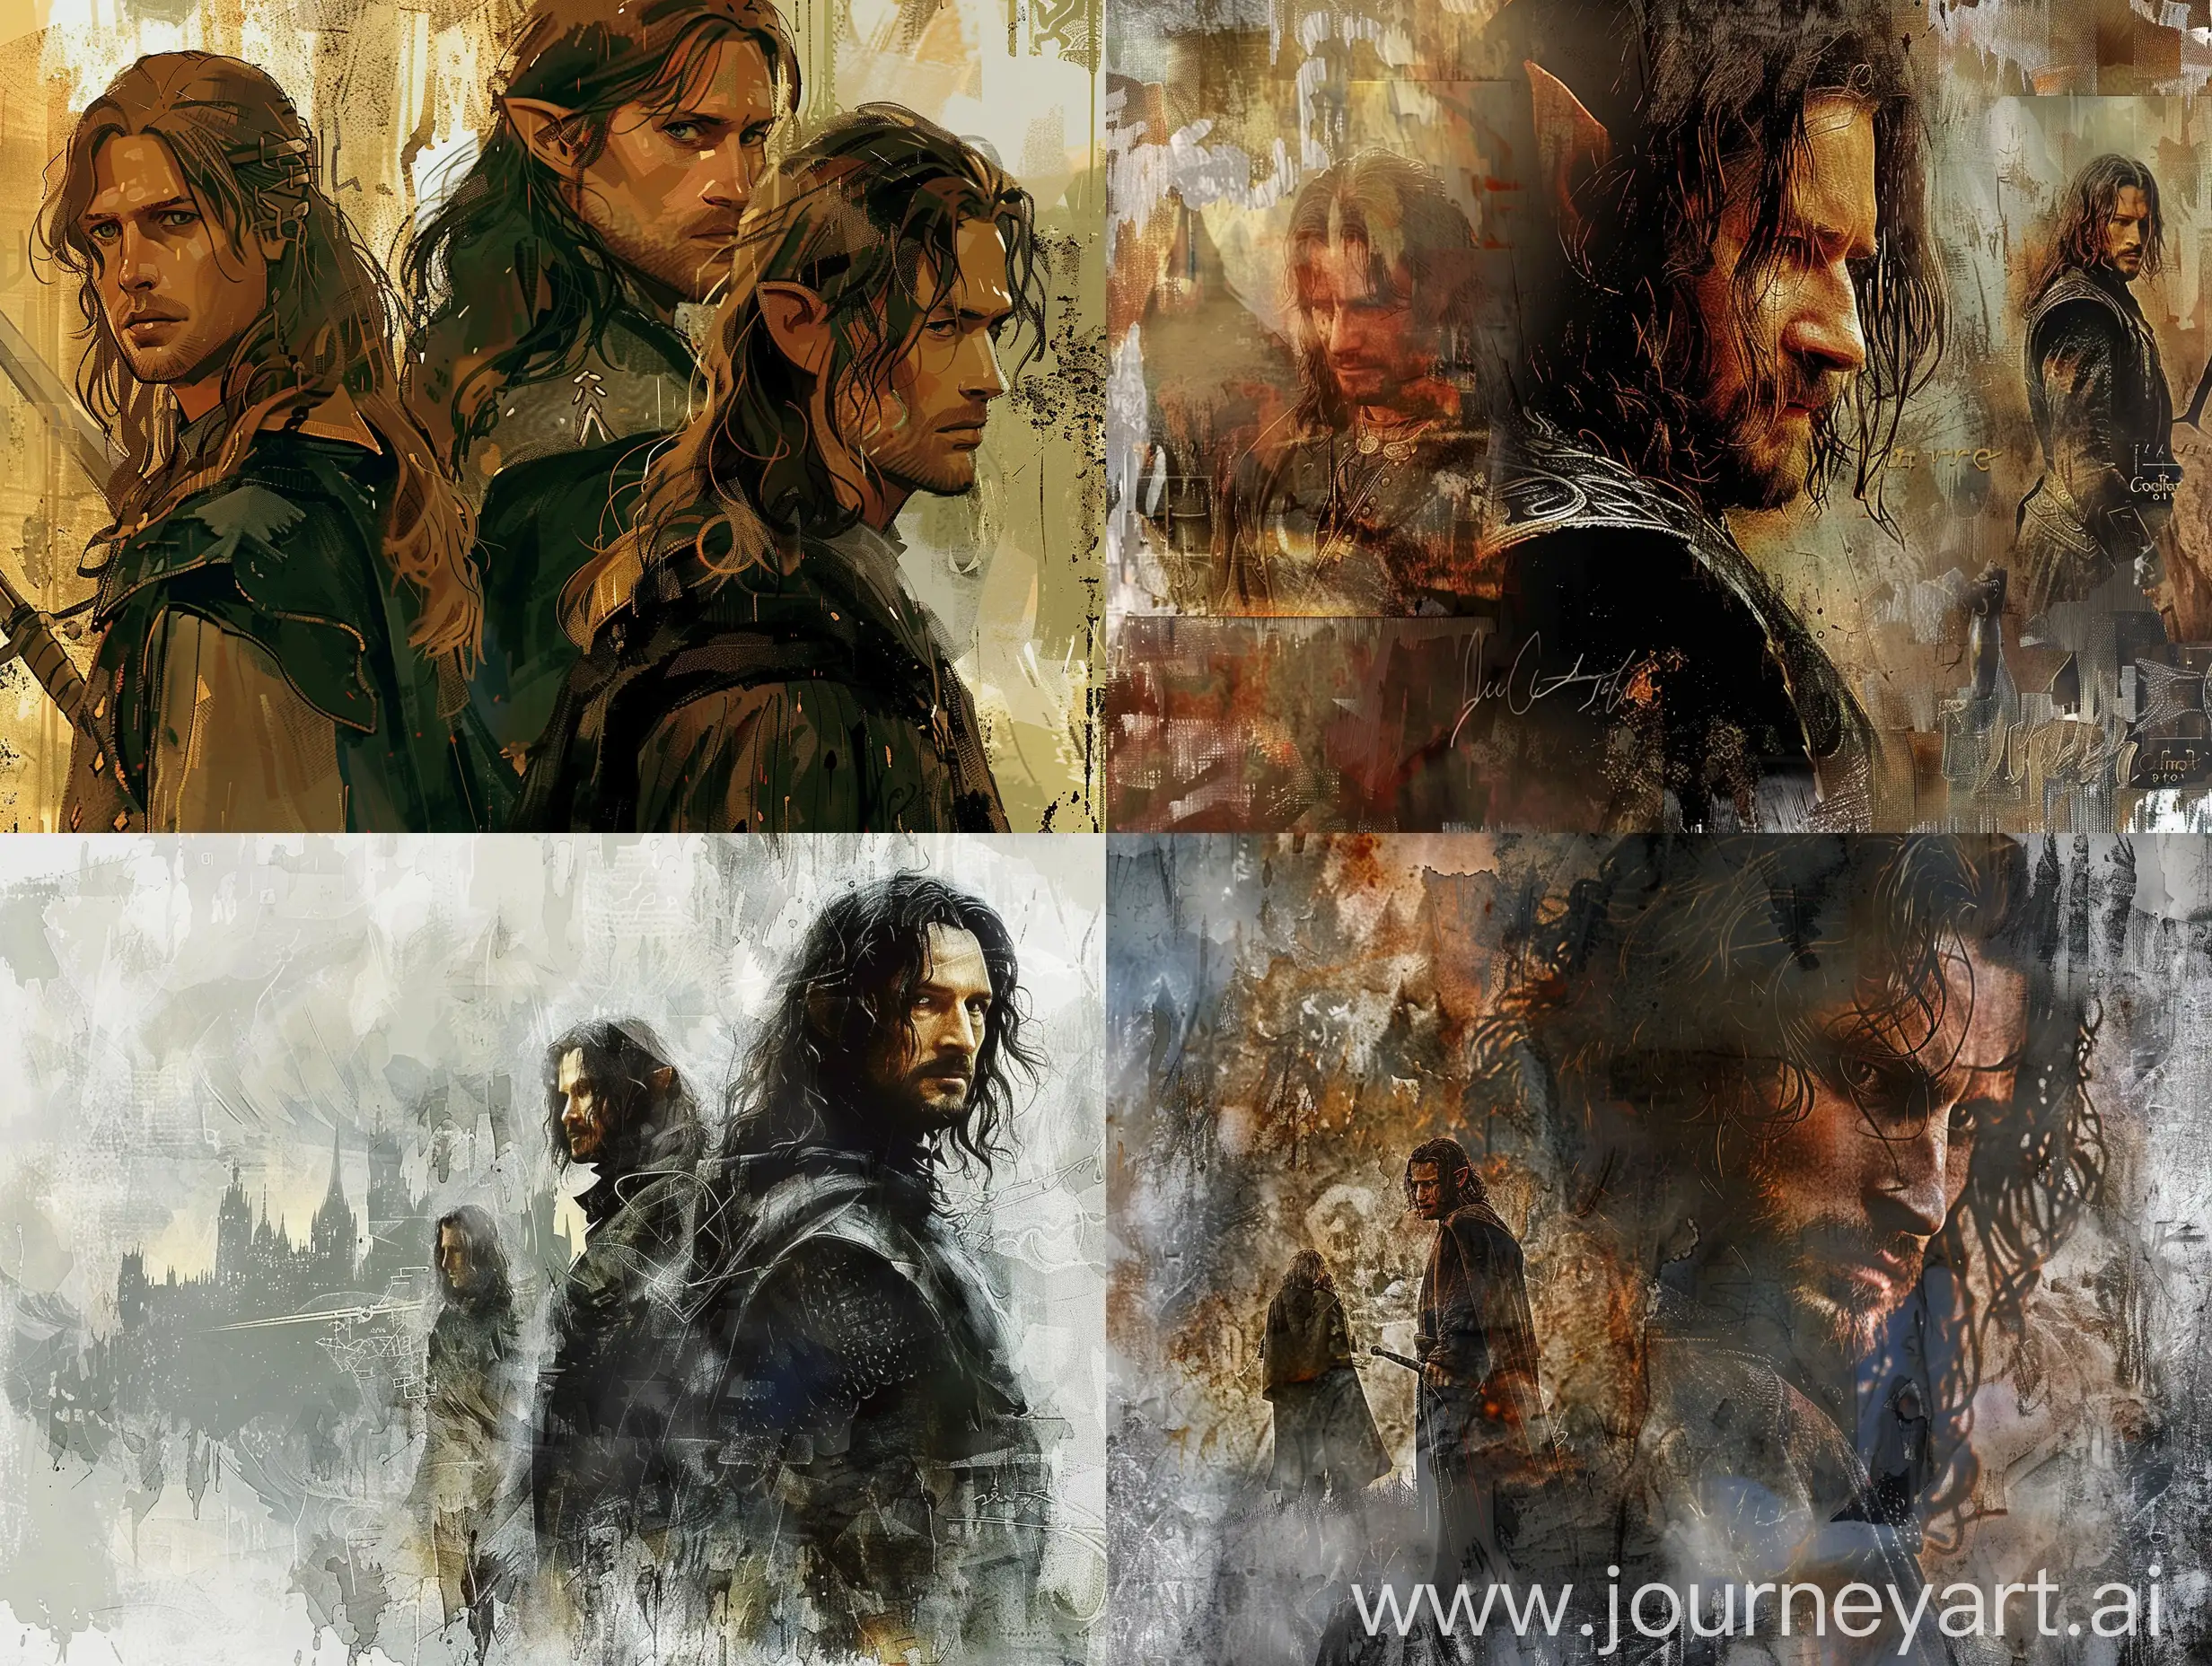 A Macbook wallpaper that shows the sons of Gondor, Boromir and Faramir, from the lord of the rings. It can be stylized like a Collage.